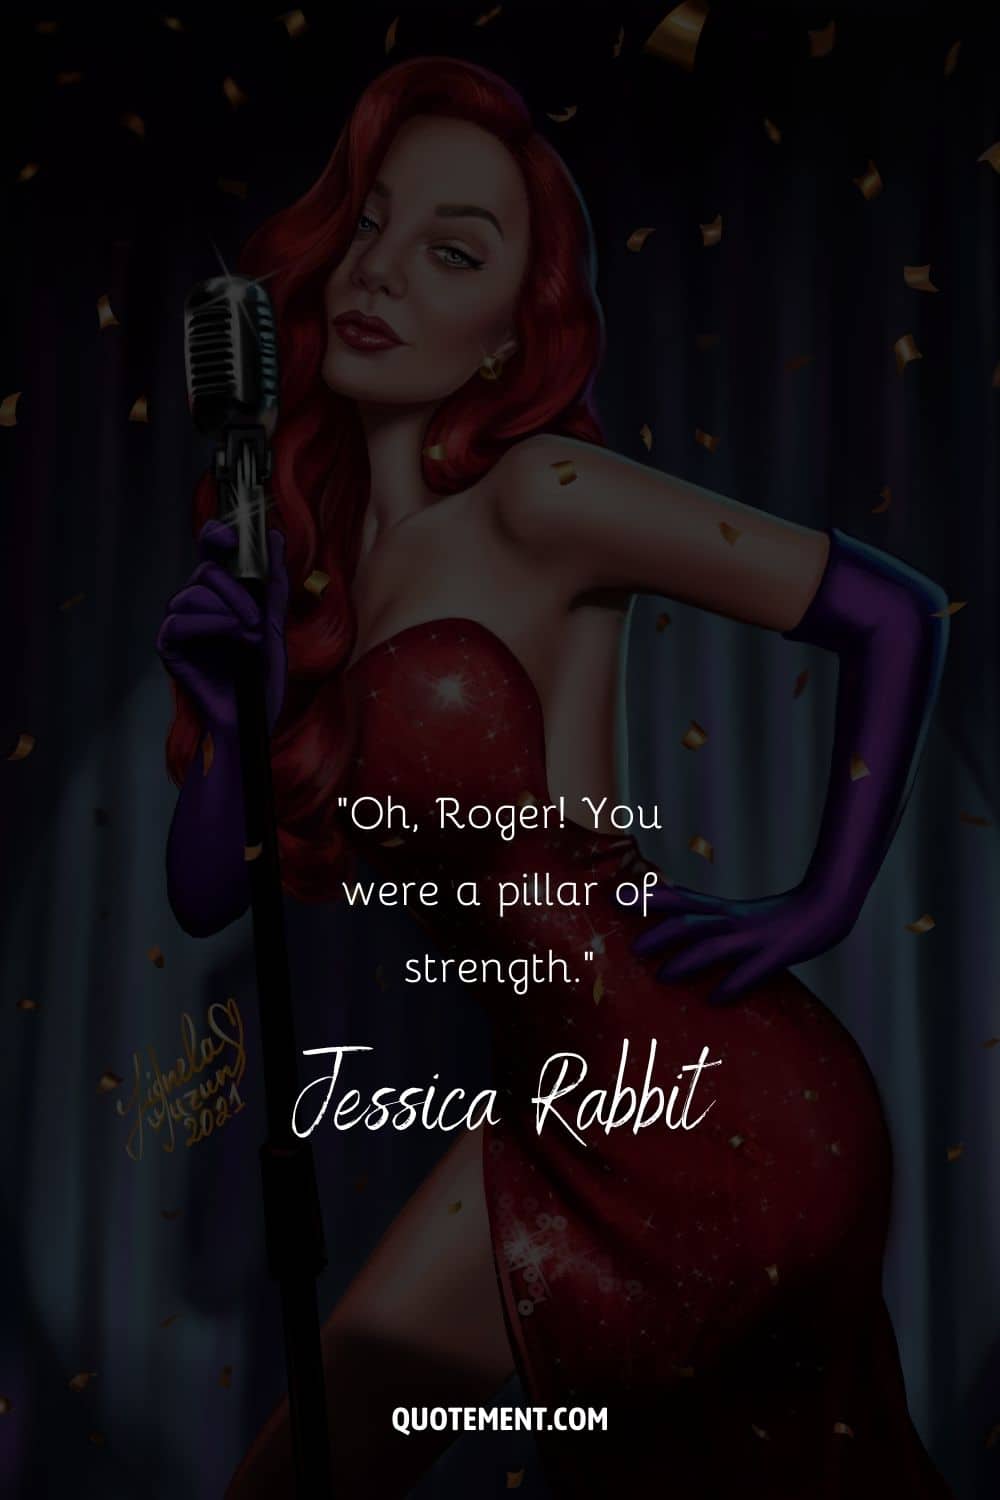 modern Jessica Rabbit illustration representing her famous quote about Roger
